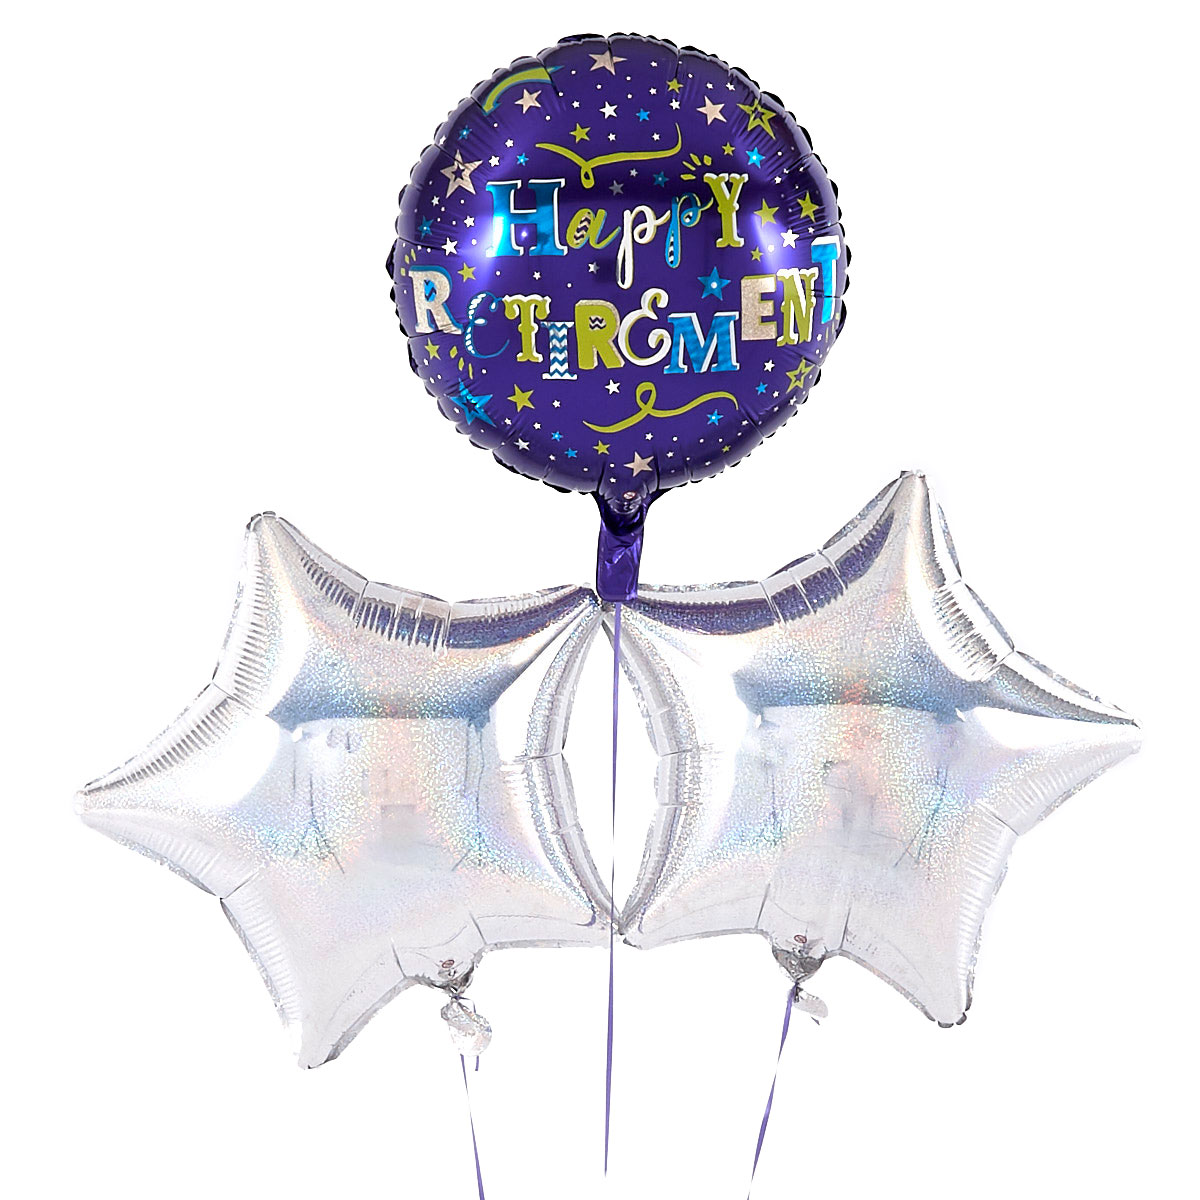 Happy Retirement Silver Balloon Bouquet - DELIVERED INFLATED!